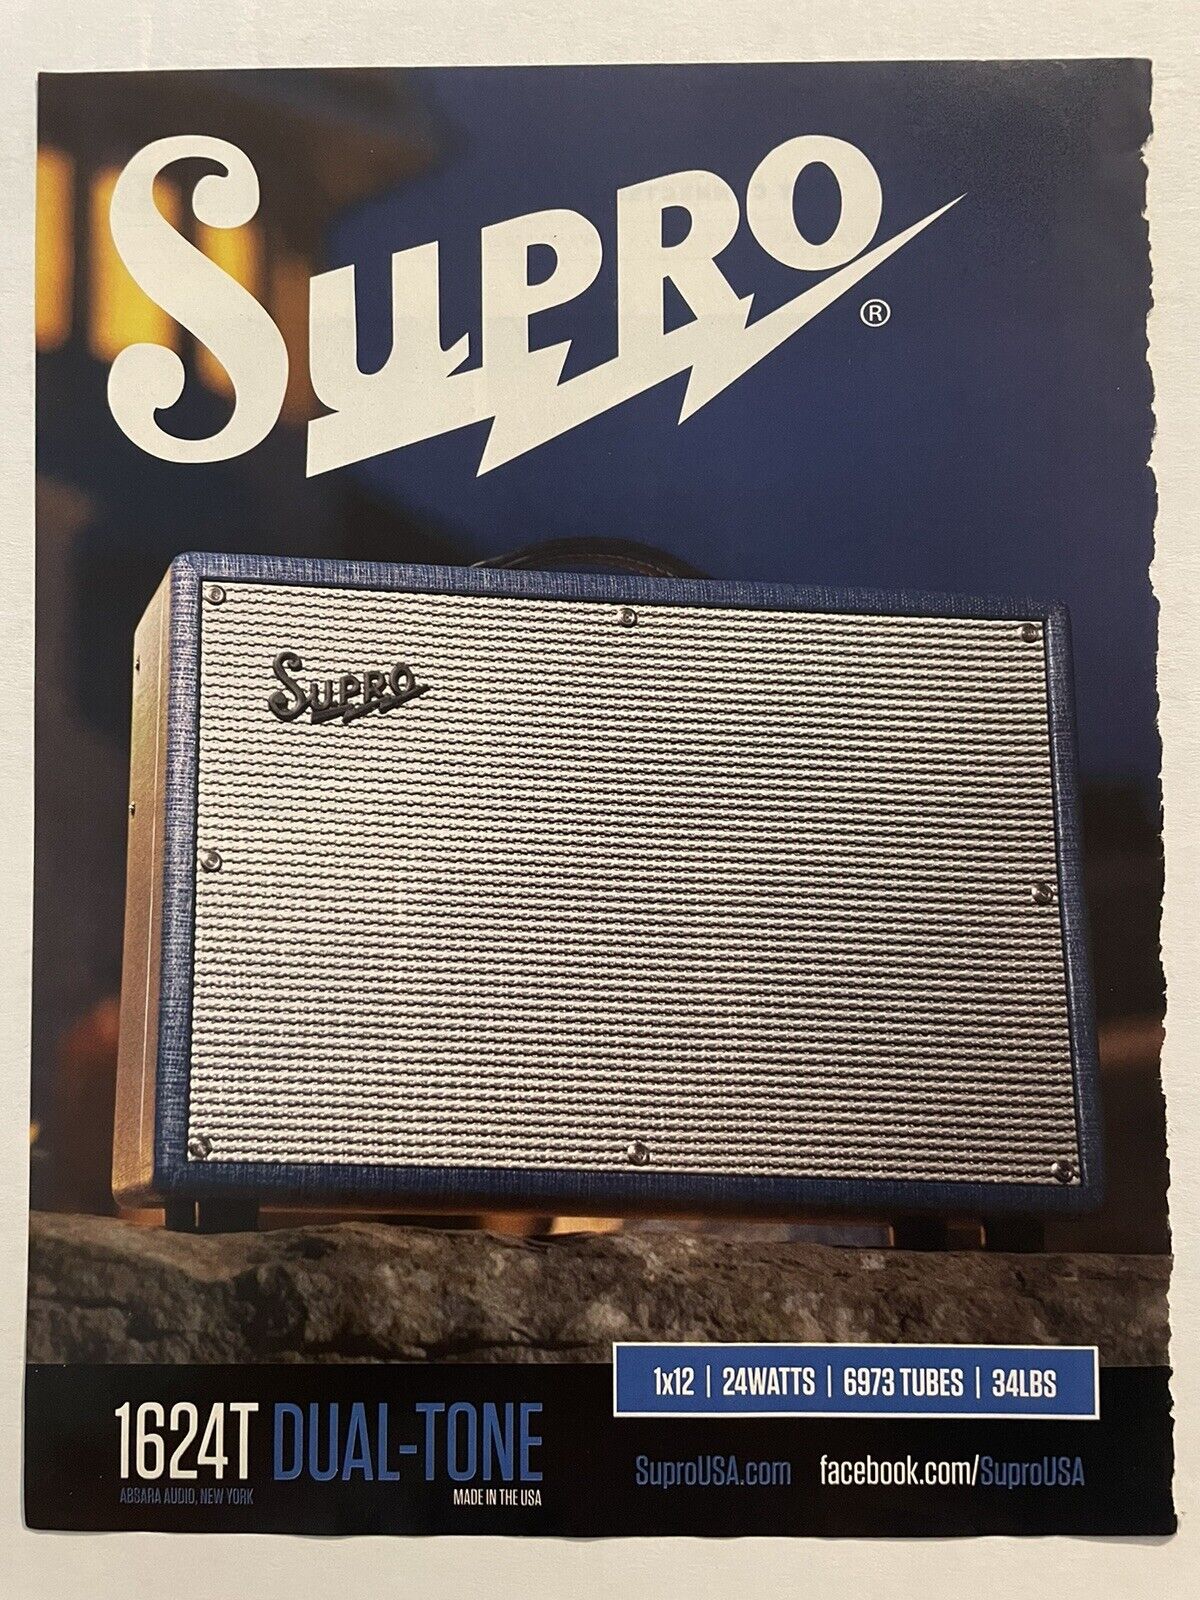 Supro Magazine Print Ad 1624T Dual-Tone Made in the USA 6973 Tubes 24 Watts